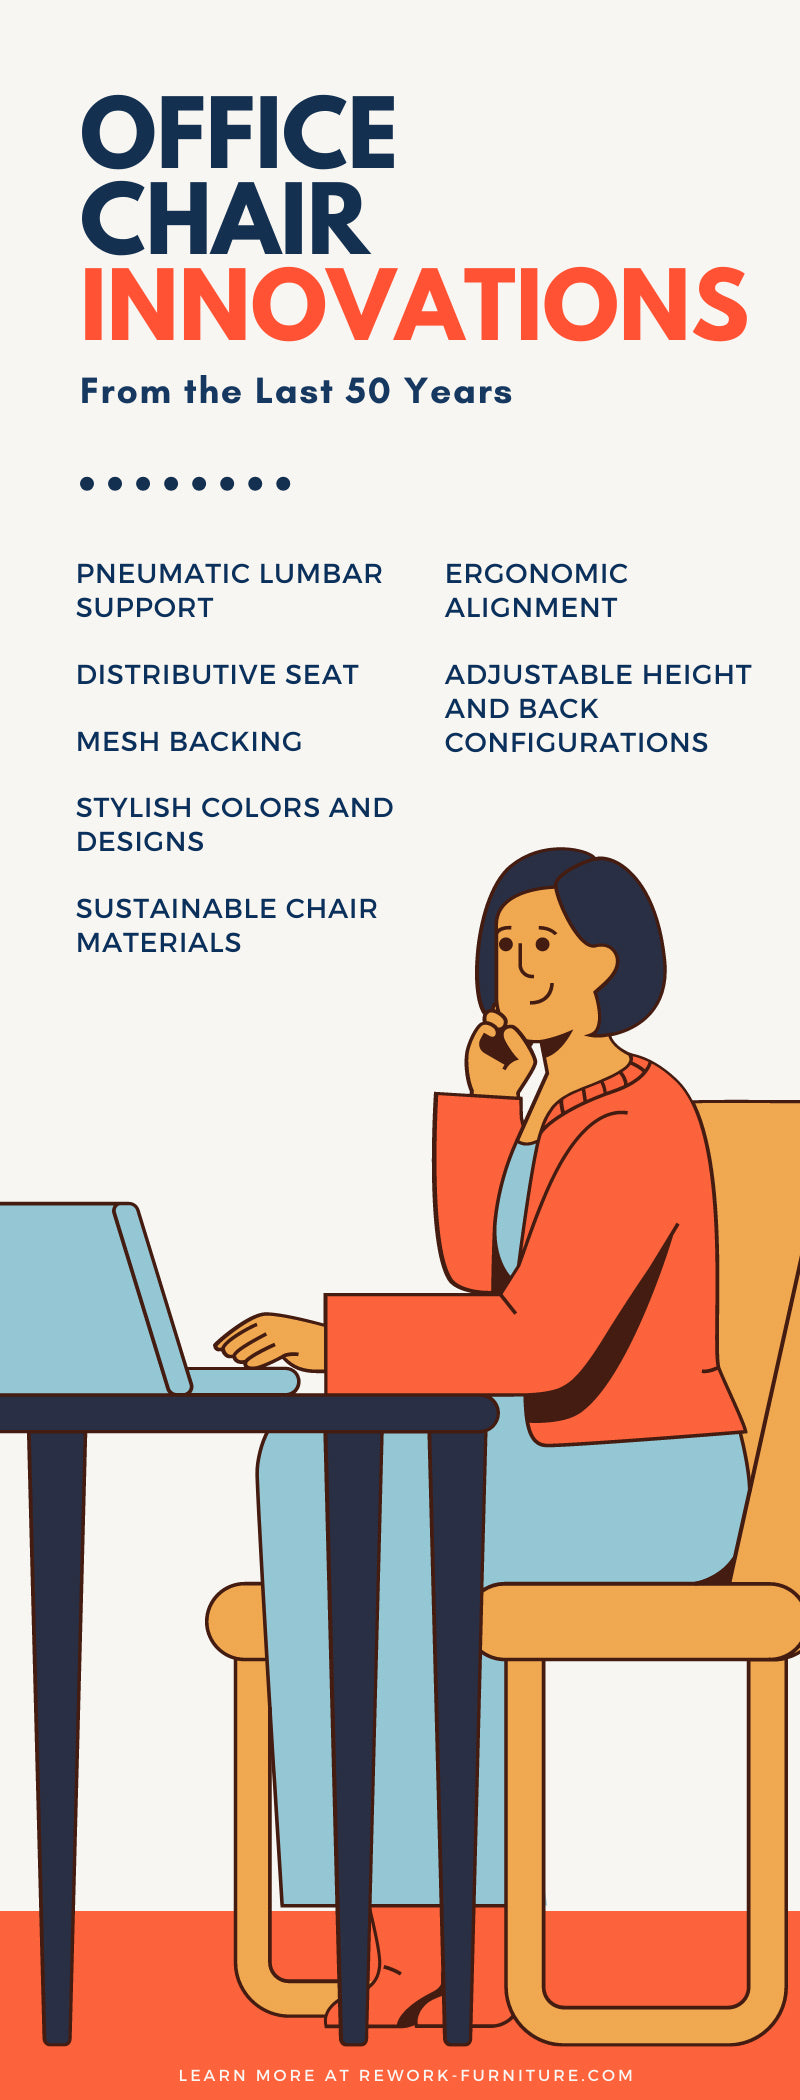 Office Chair Innovations From the Last 50 Years